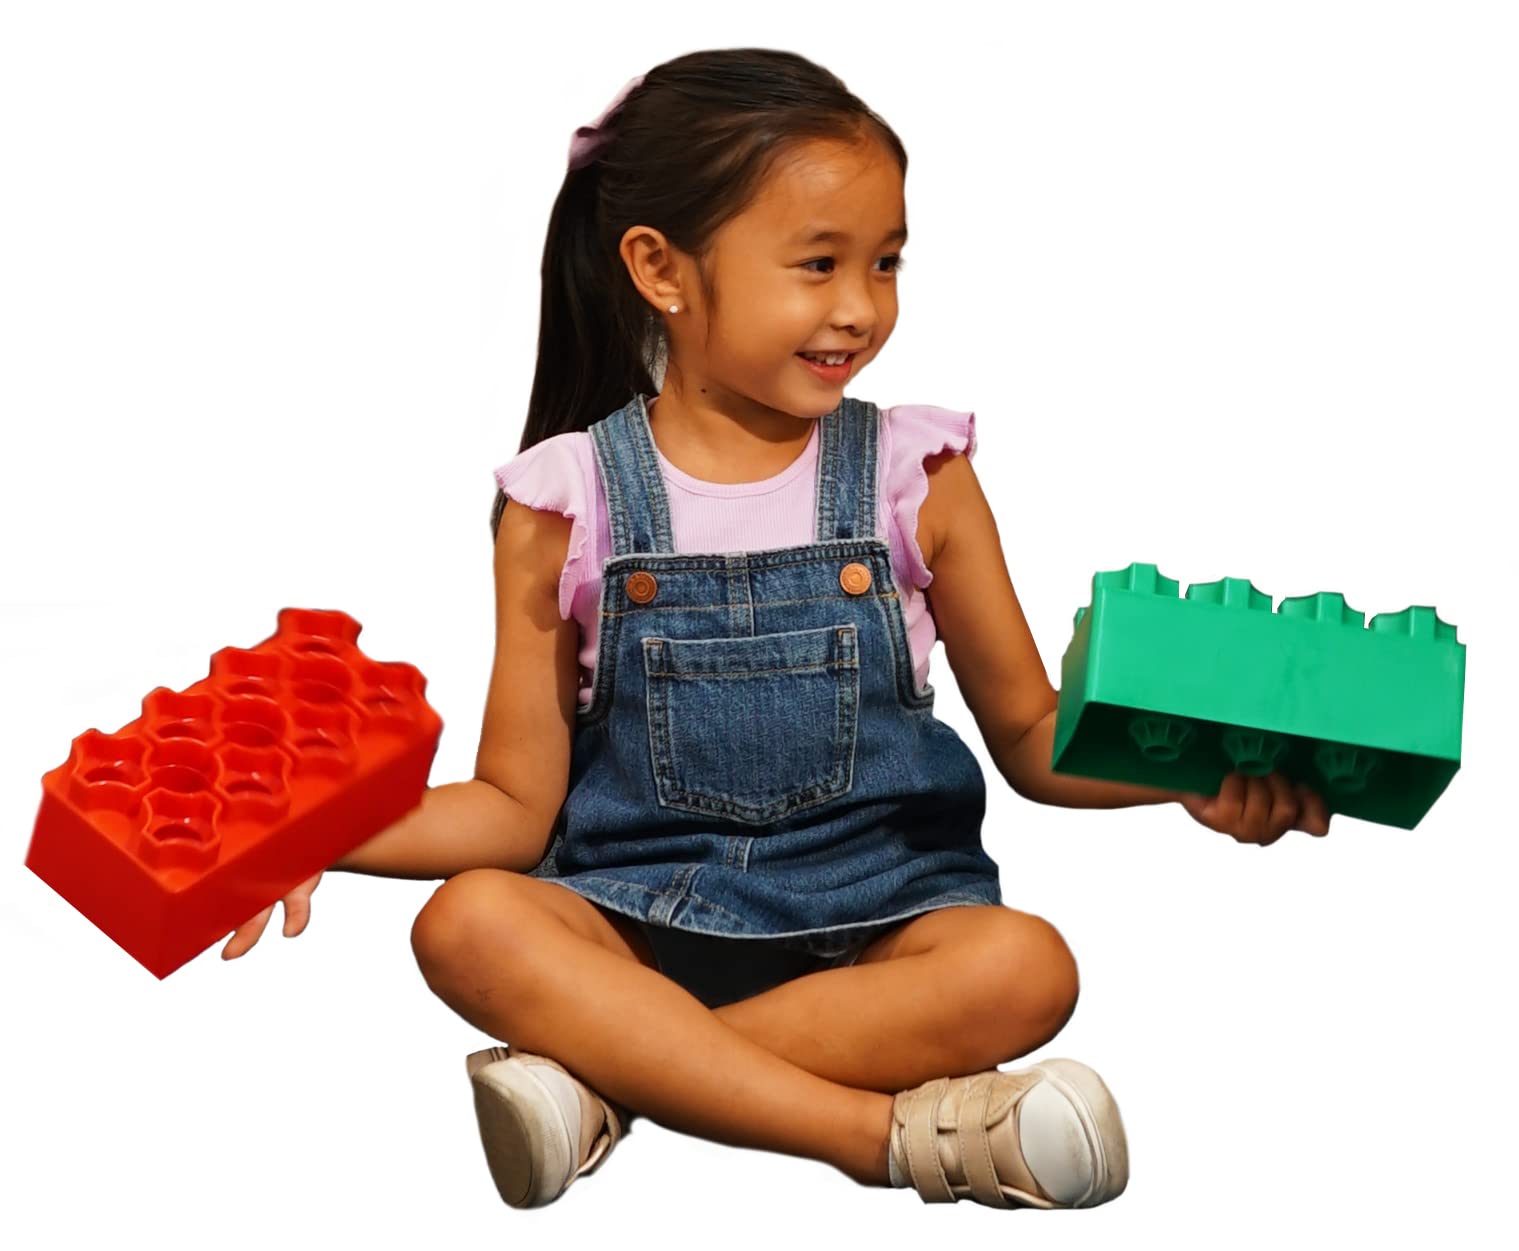 Kids Adventure 64 pc Jumbo Blocks Set - Large Building ADD-ON Kit for Toddlers -Add on to Any existing Made in The USA Boys& Girls, Red,Blue,Yellow,Green, 8'' x 4'' (00281-5)